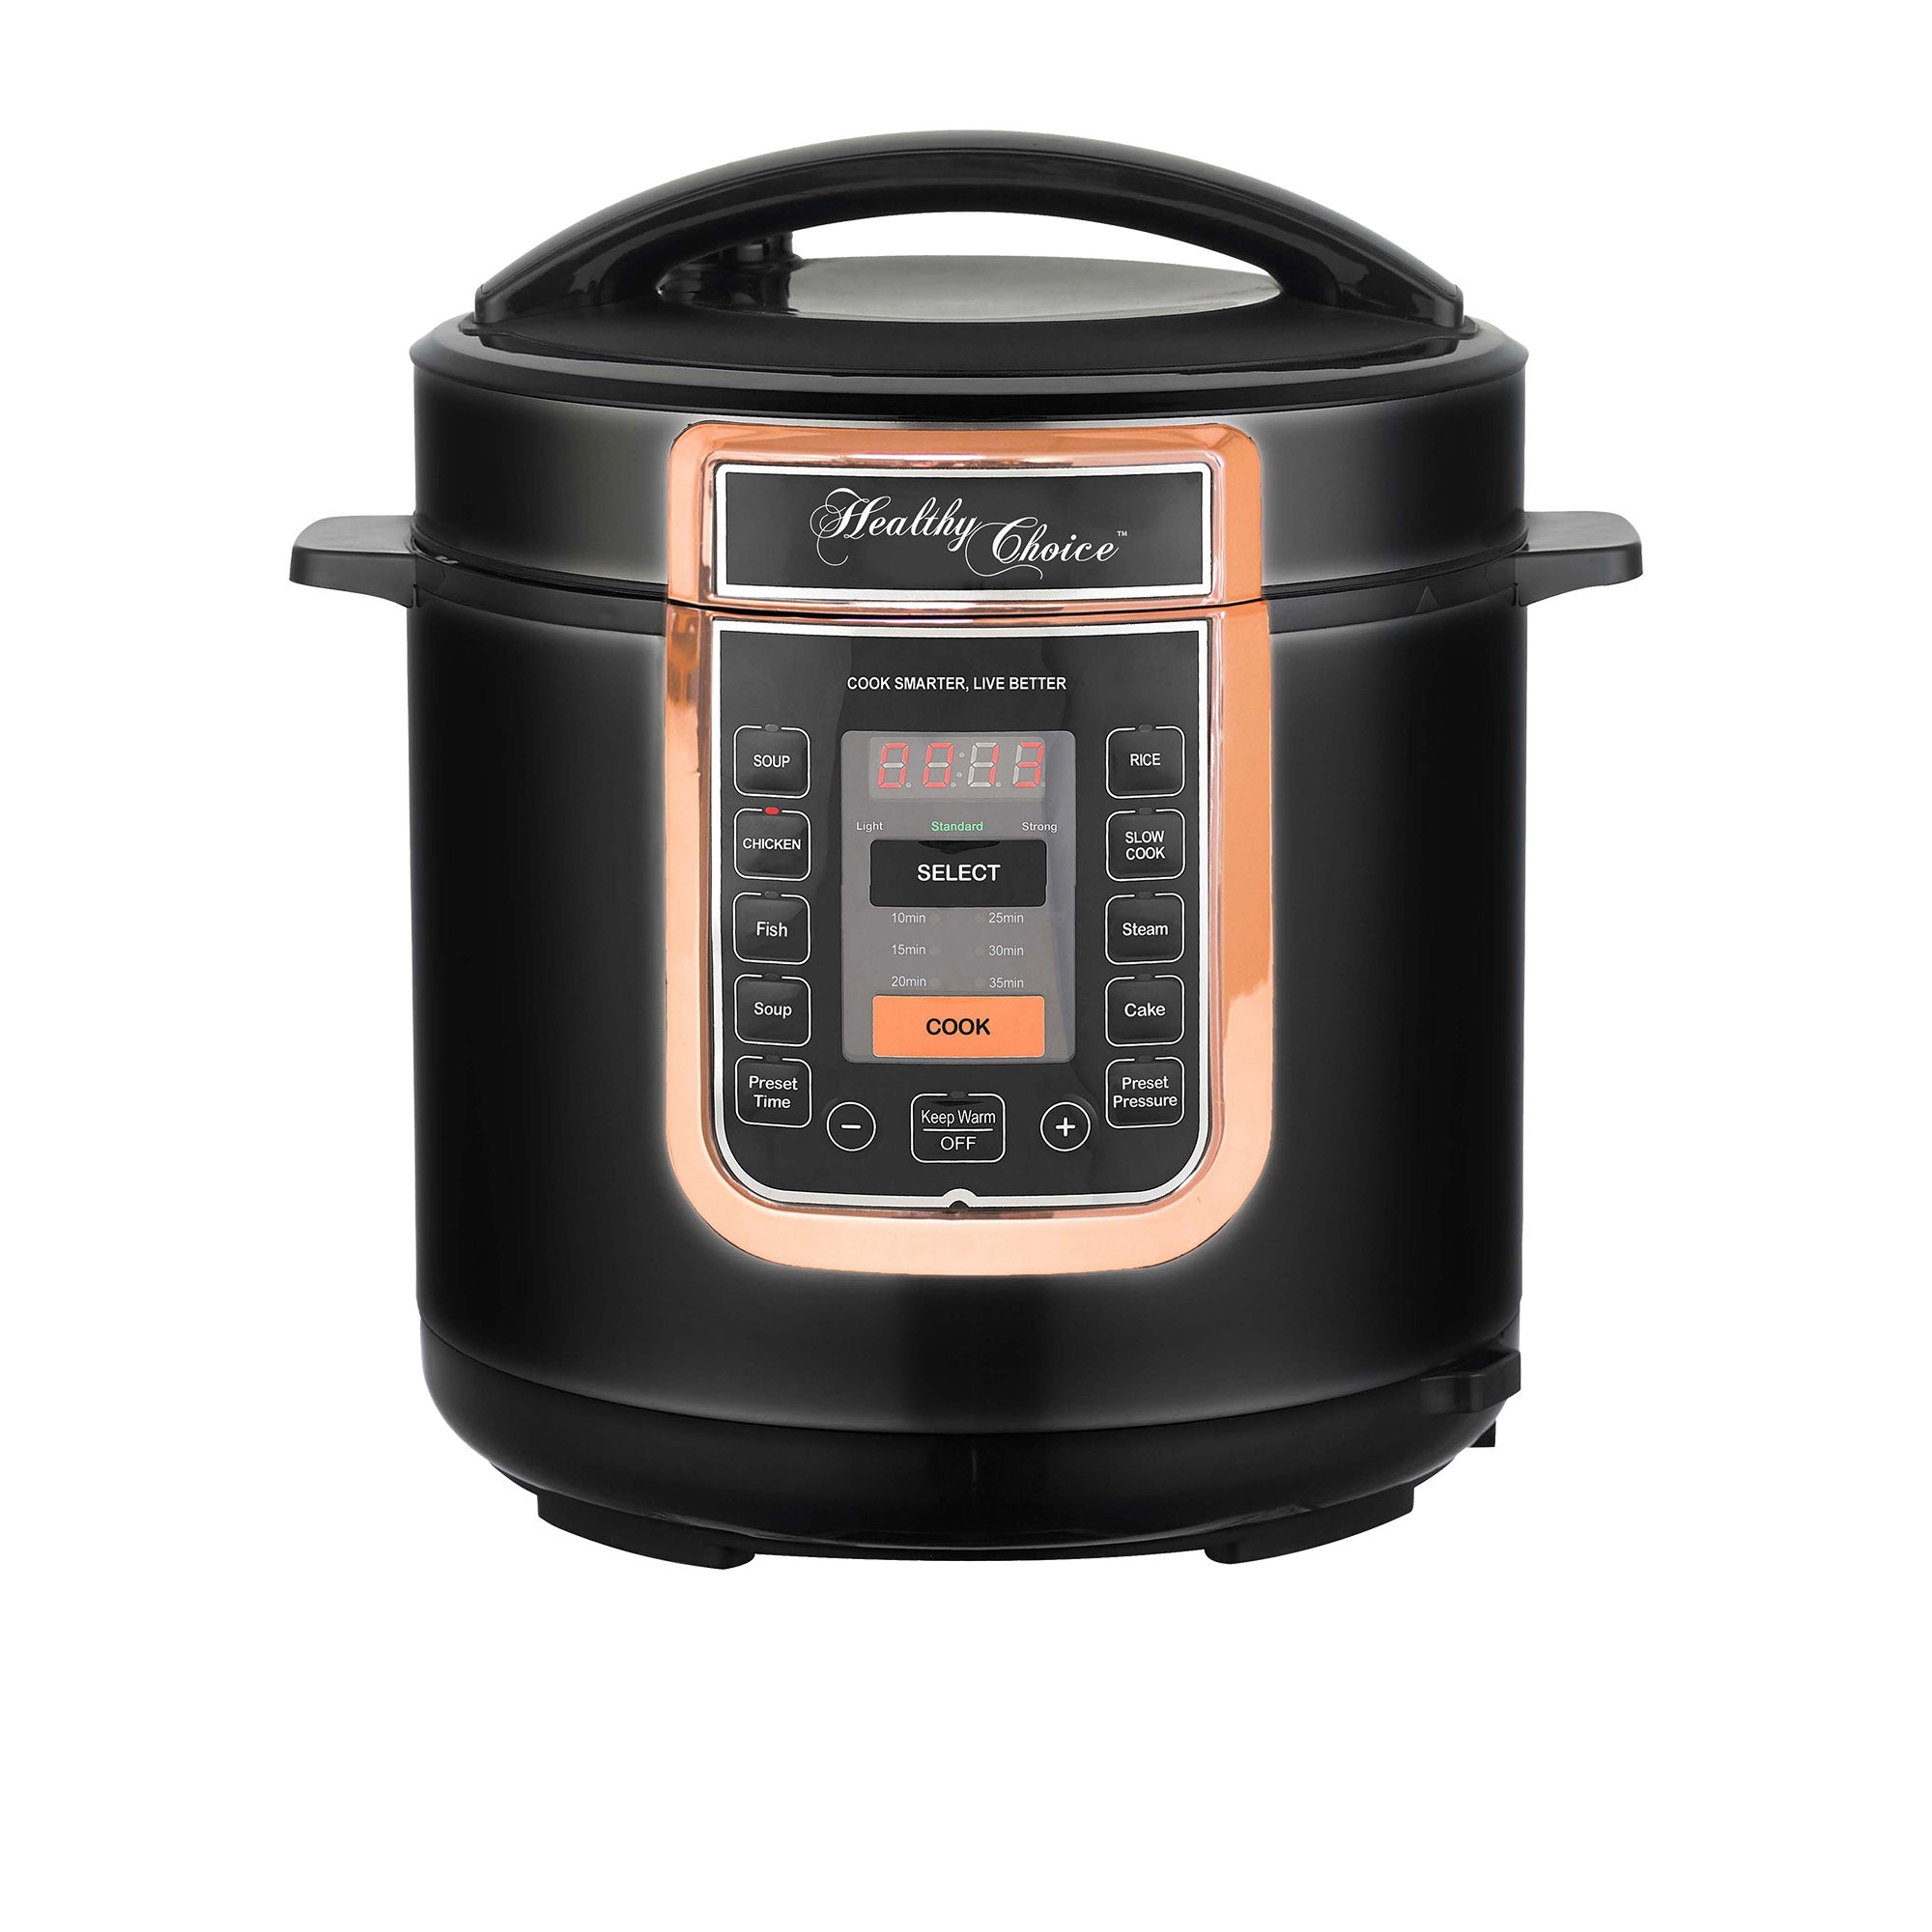 Healthy Choice Pressure Cooker with Rose Gold Trim 6L Black Image 1